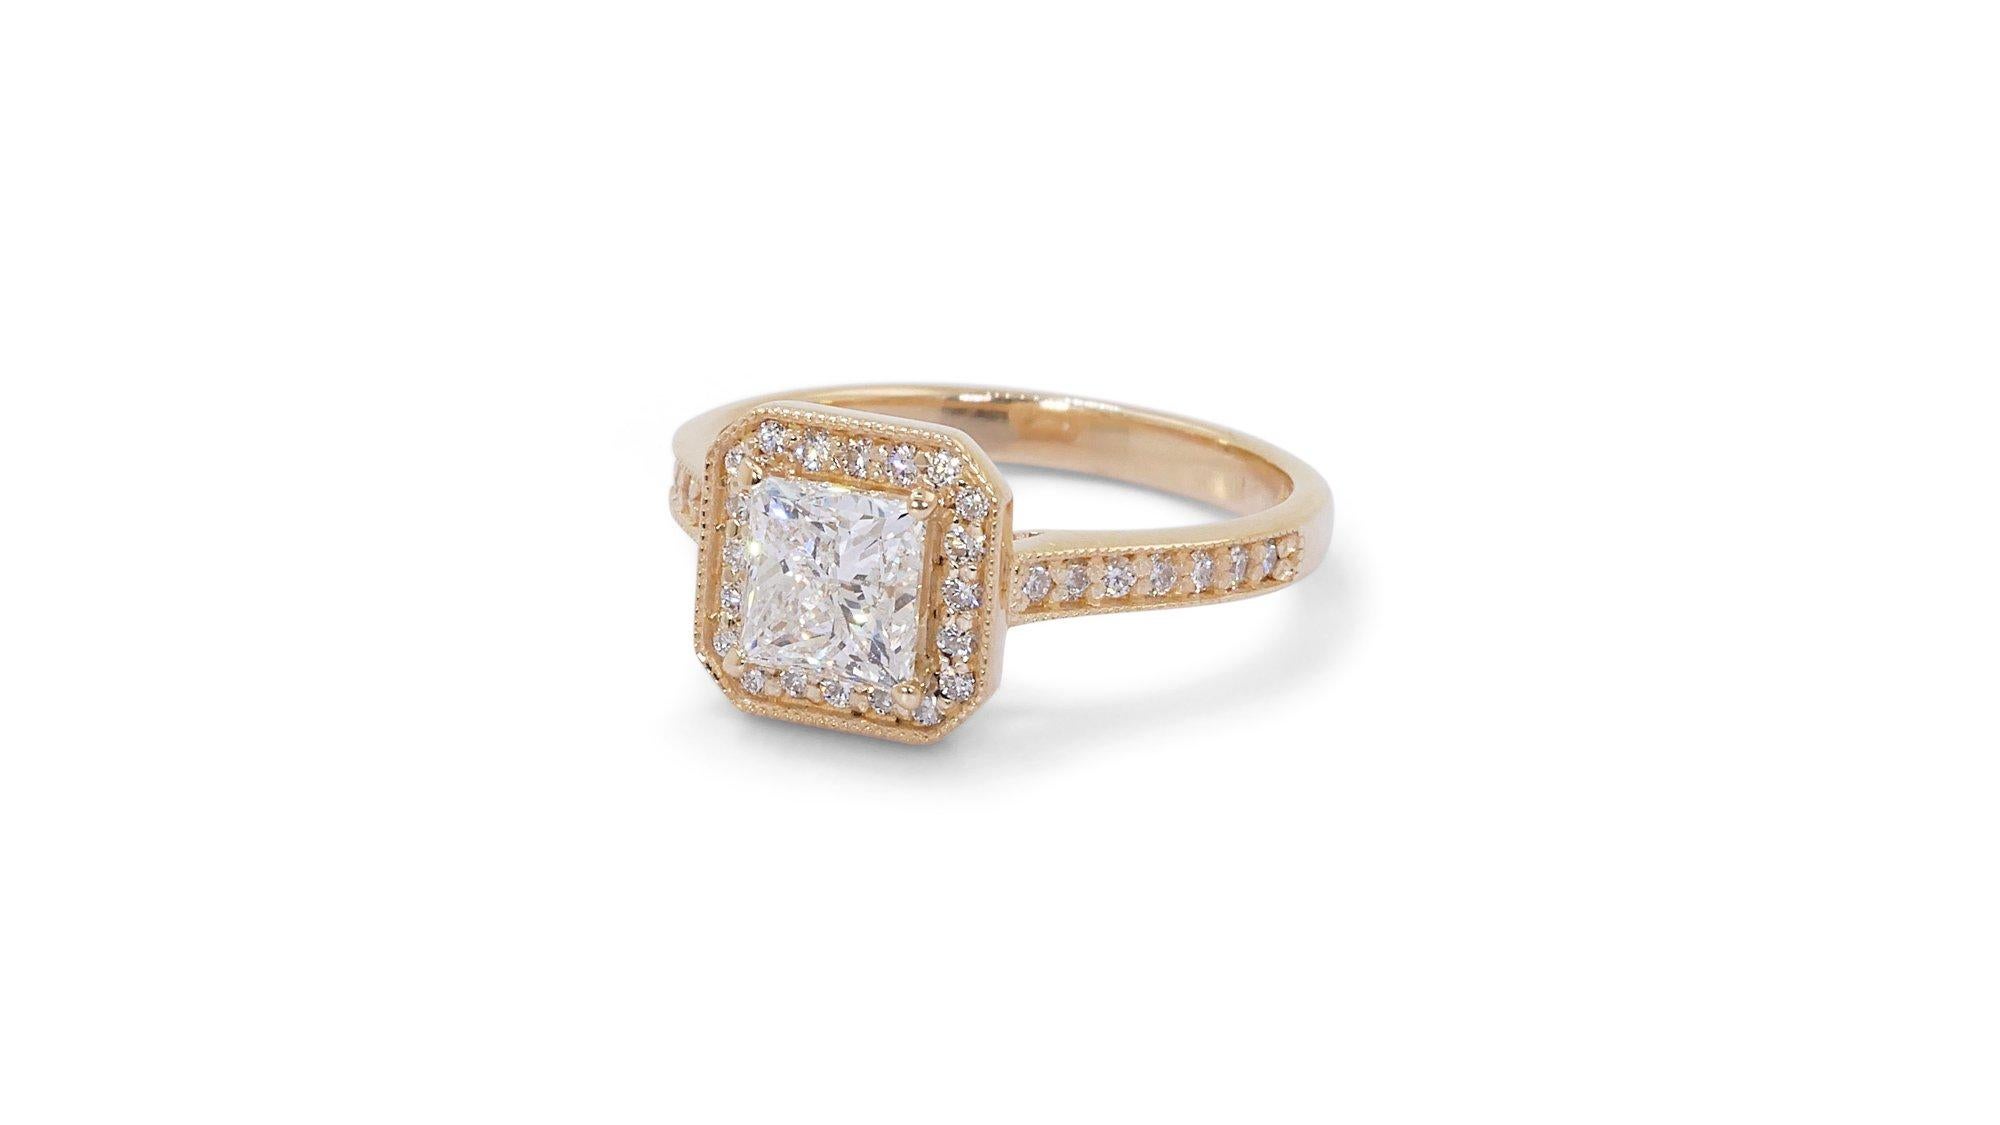 Beautiful 18K Yellow Gold Natural Diamond Princess Halo Ring w/1.36 Carat - GIA Certified

A beautiful diamond princess halo ring showcasing a 1.01 carat center stone. The center stone is complemented by a sparkling halo of 34 round brilliant cut